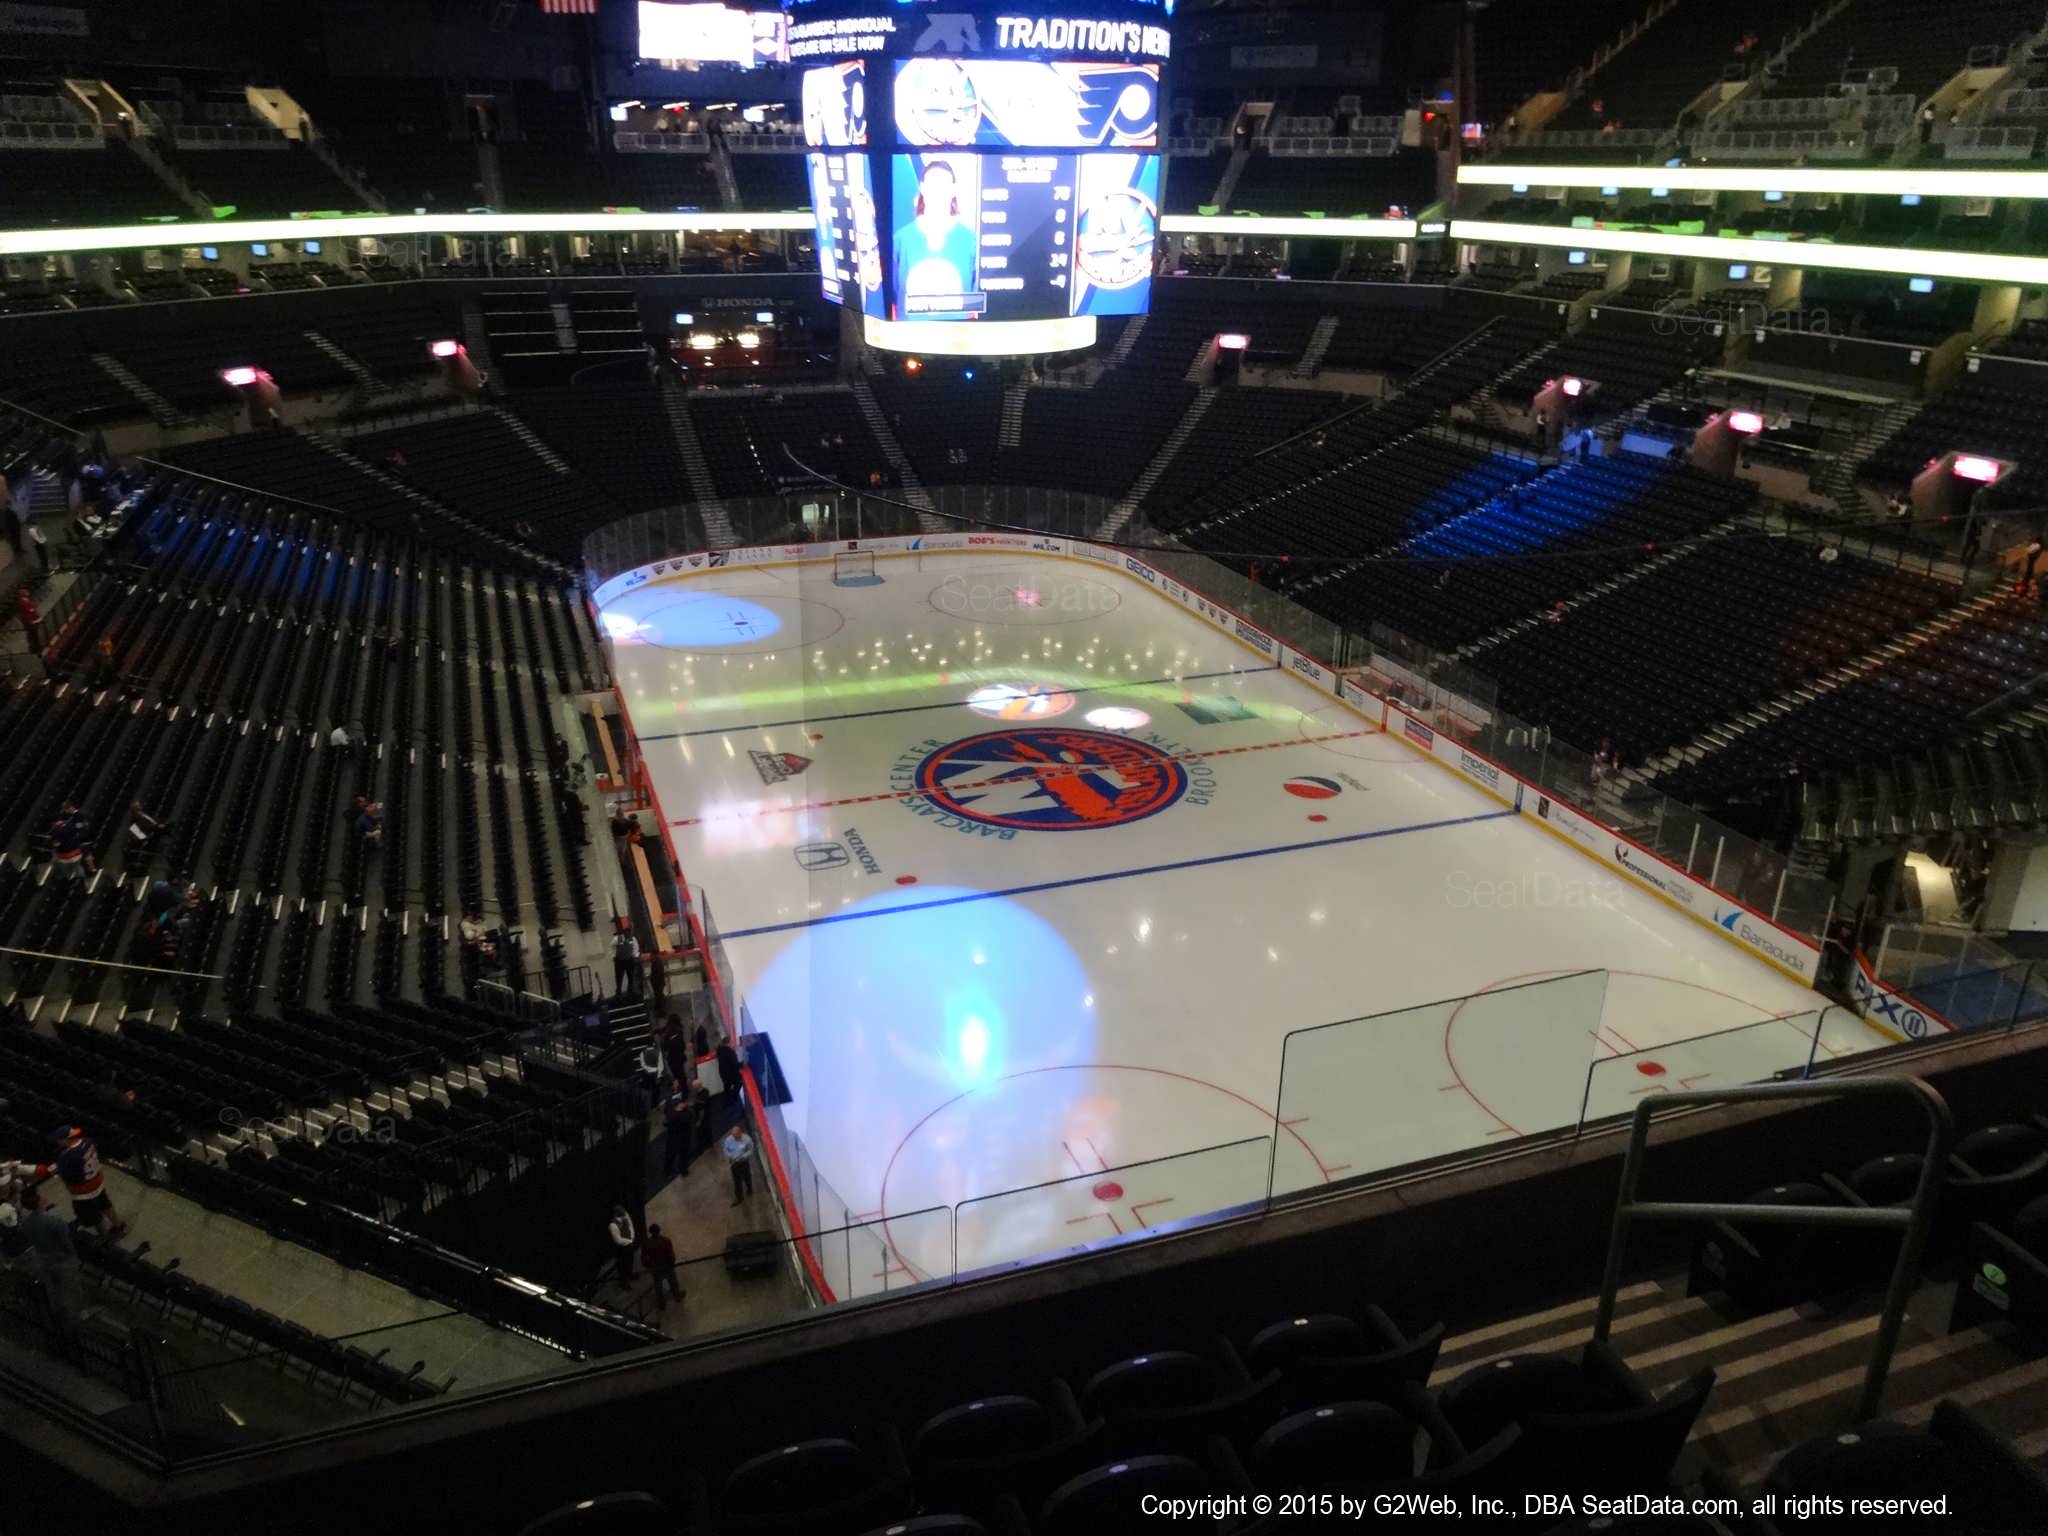 Seat View from Section 202 at the Barclays Center, home of the New York Islanders